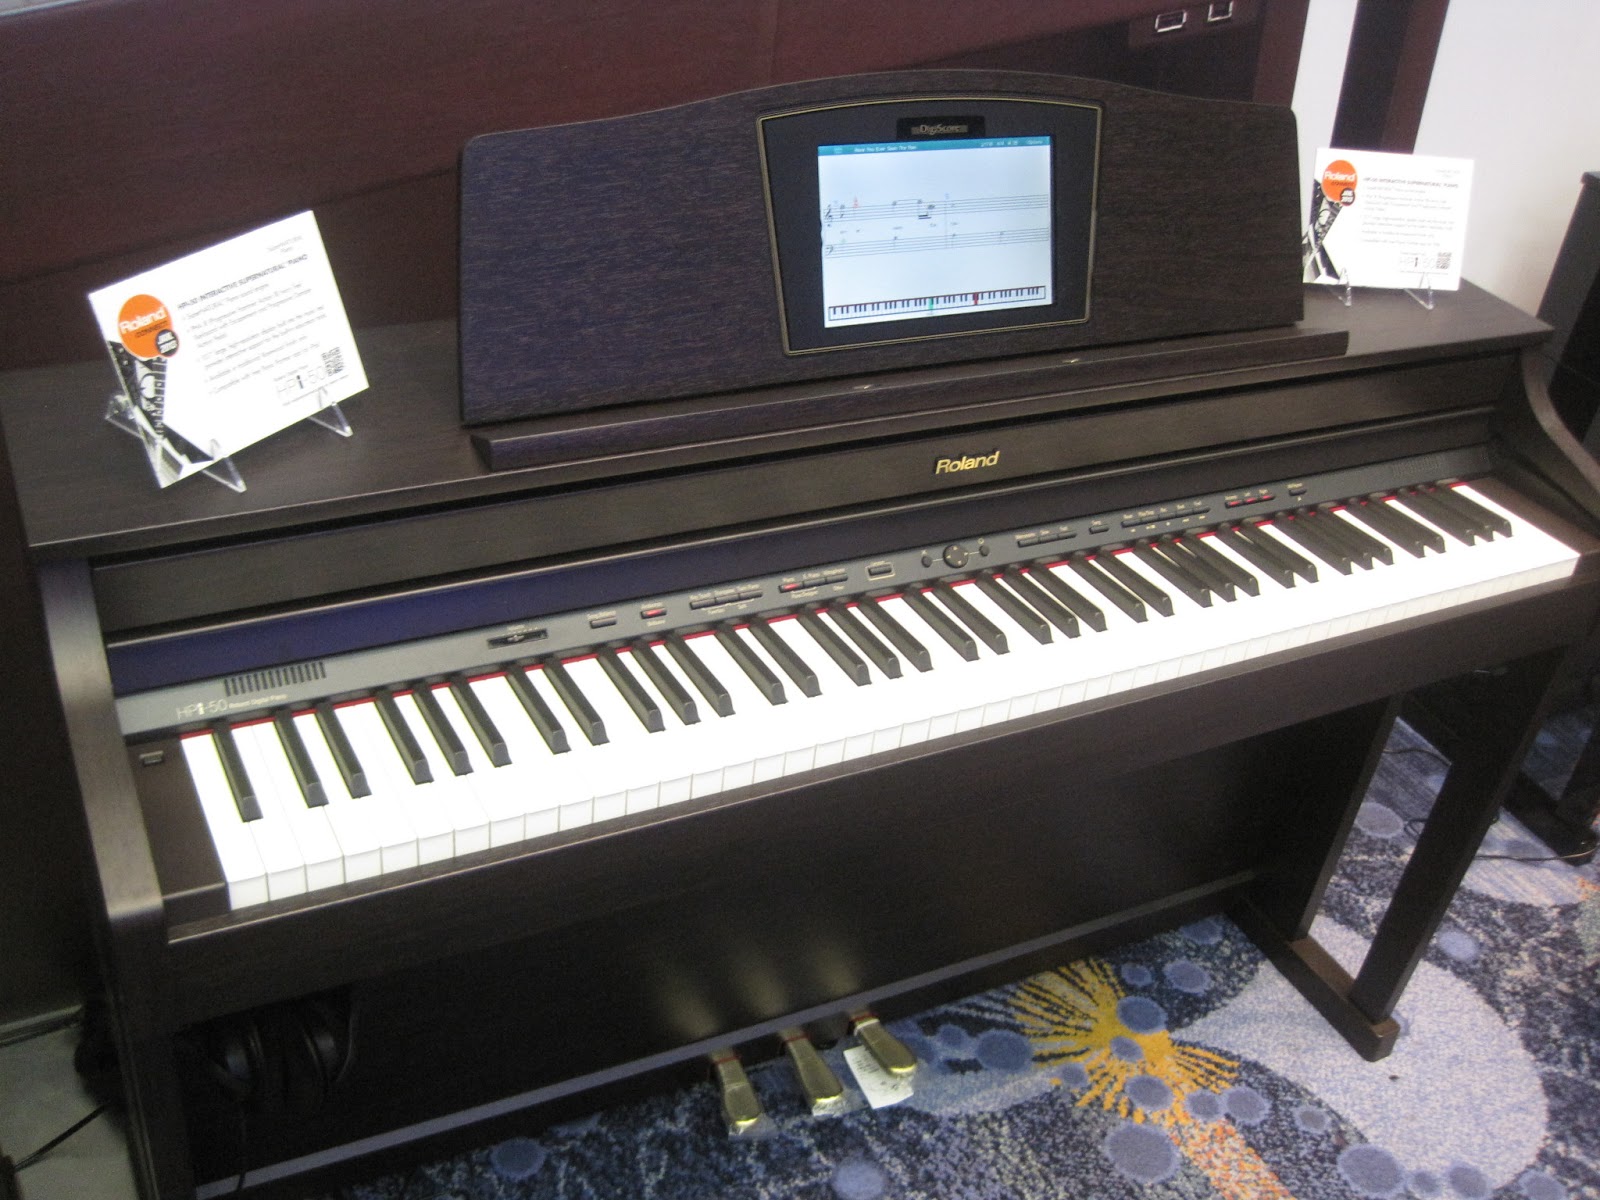 REVIEW - Roland HPi50e Digital Piano - Recommended